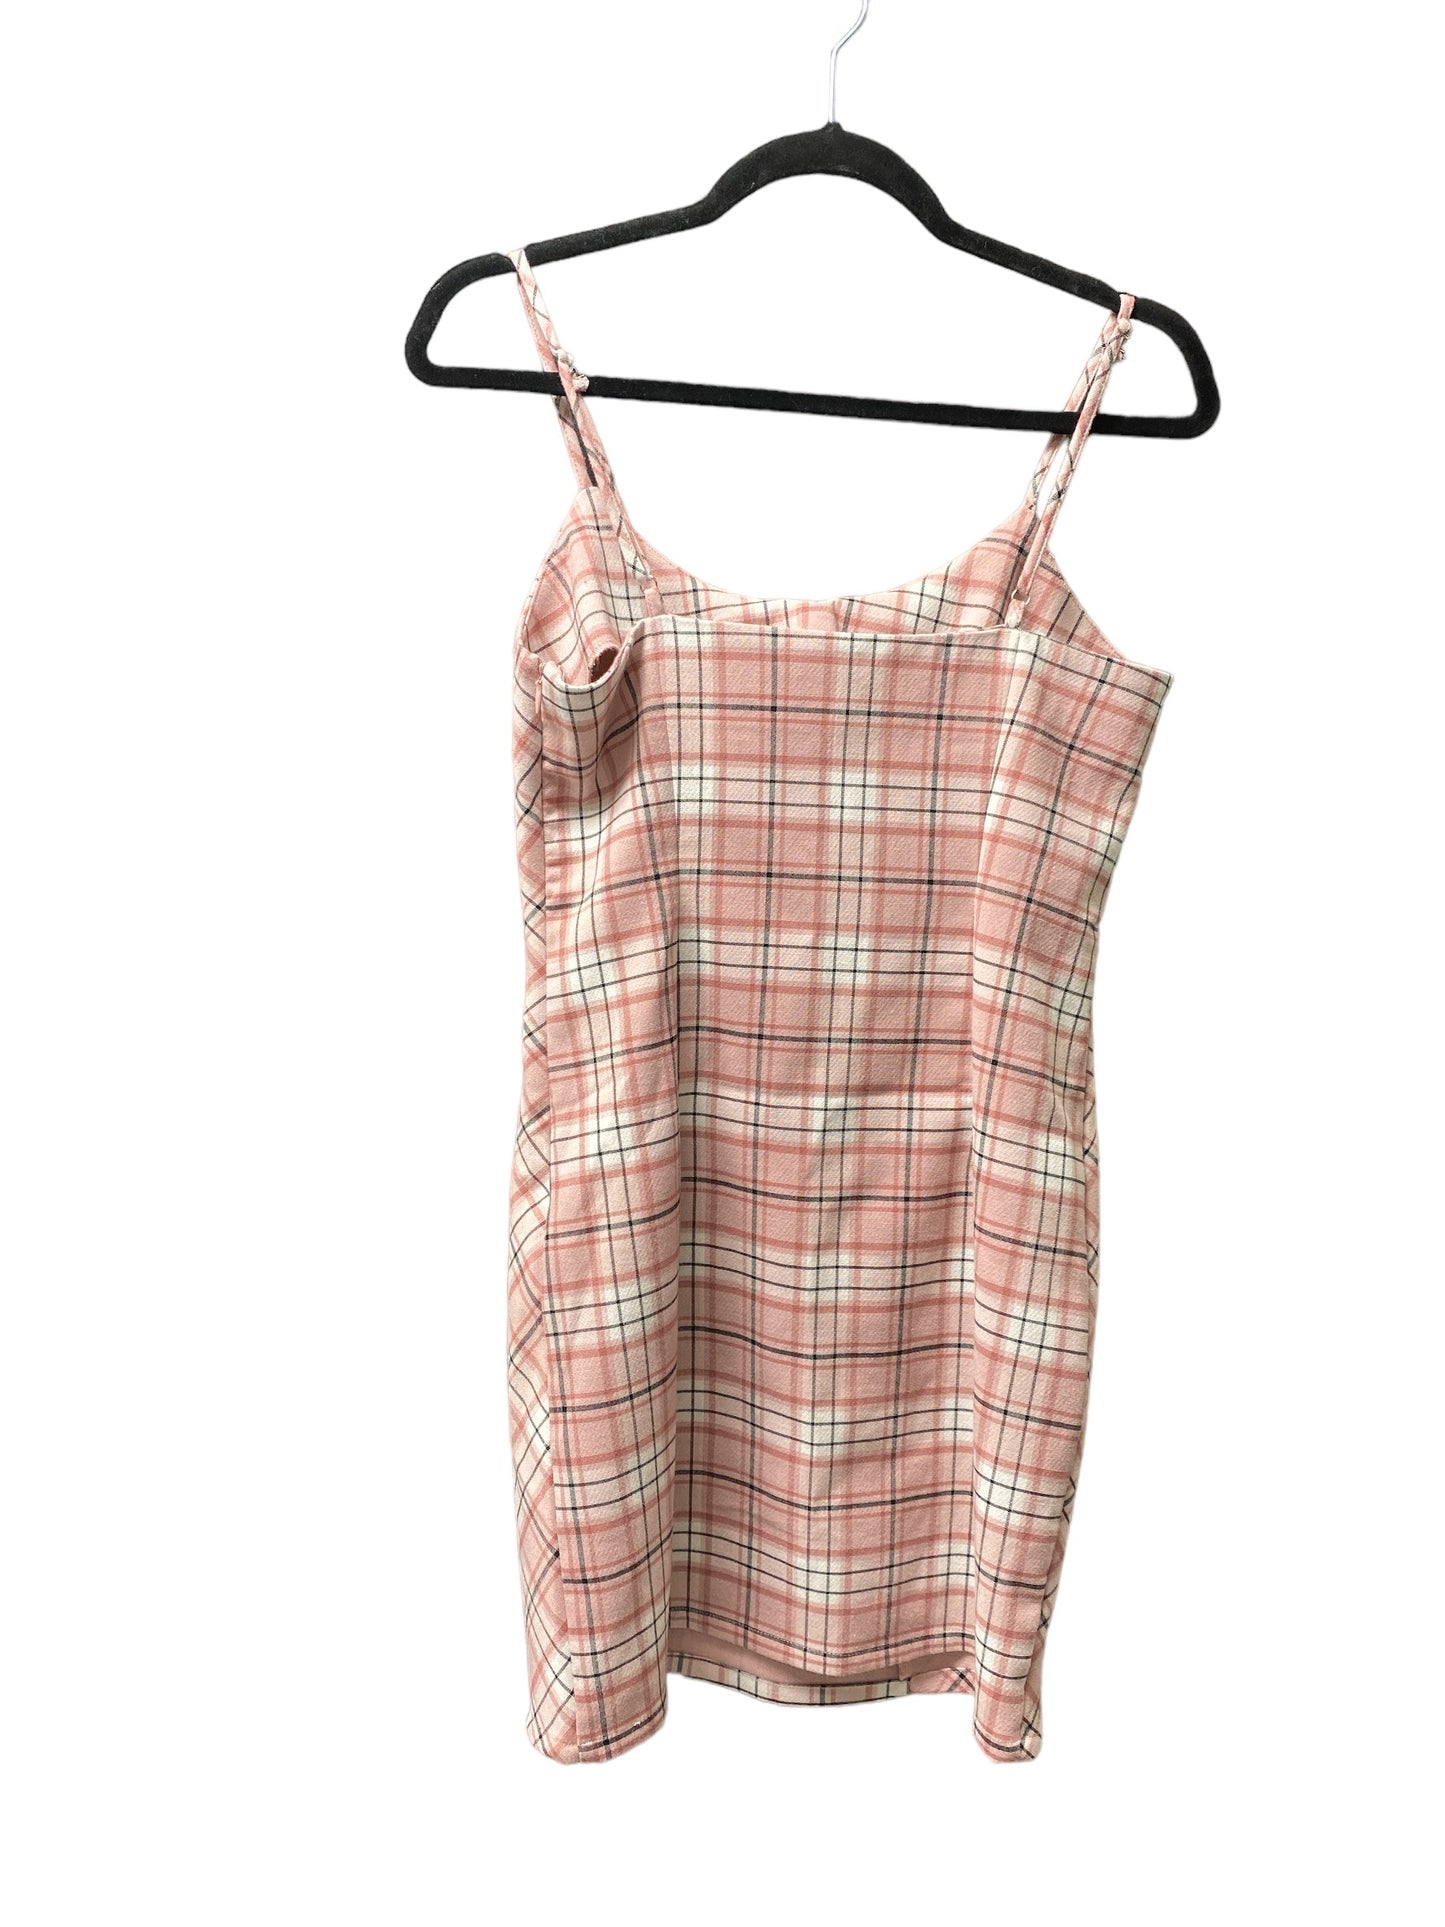 Plaid Pattern Dress Casual Short Forever 21, Size S